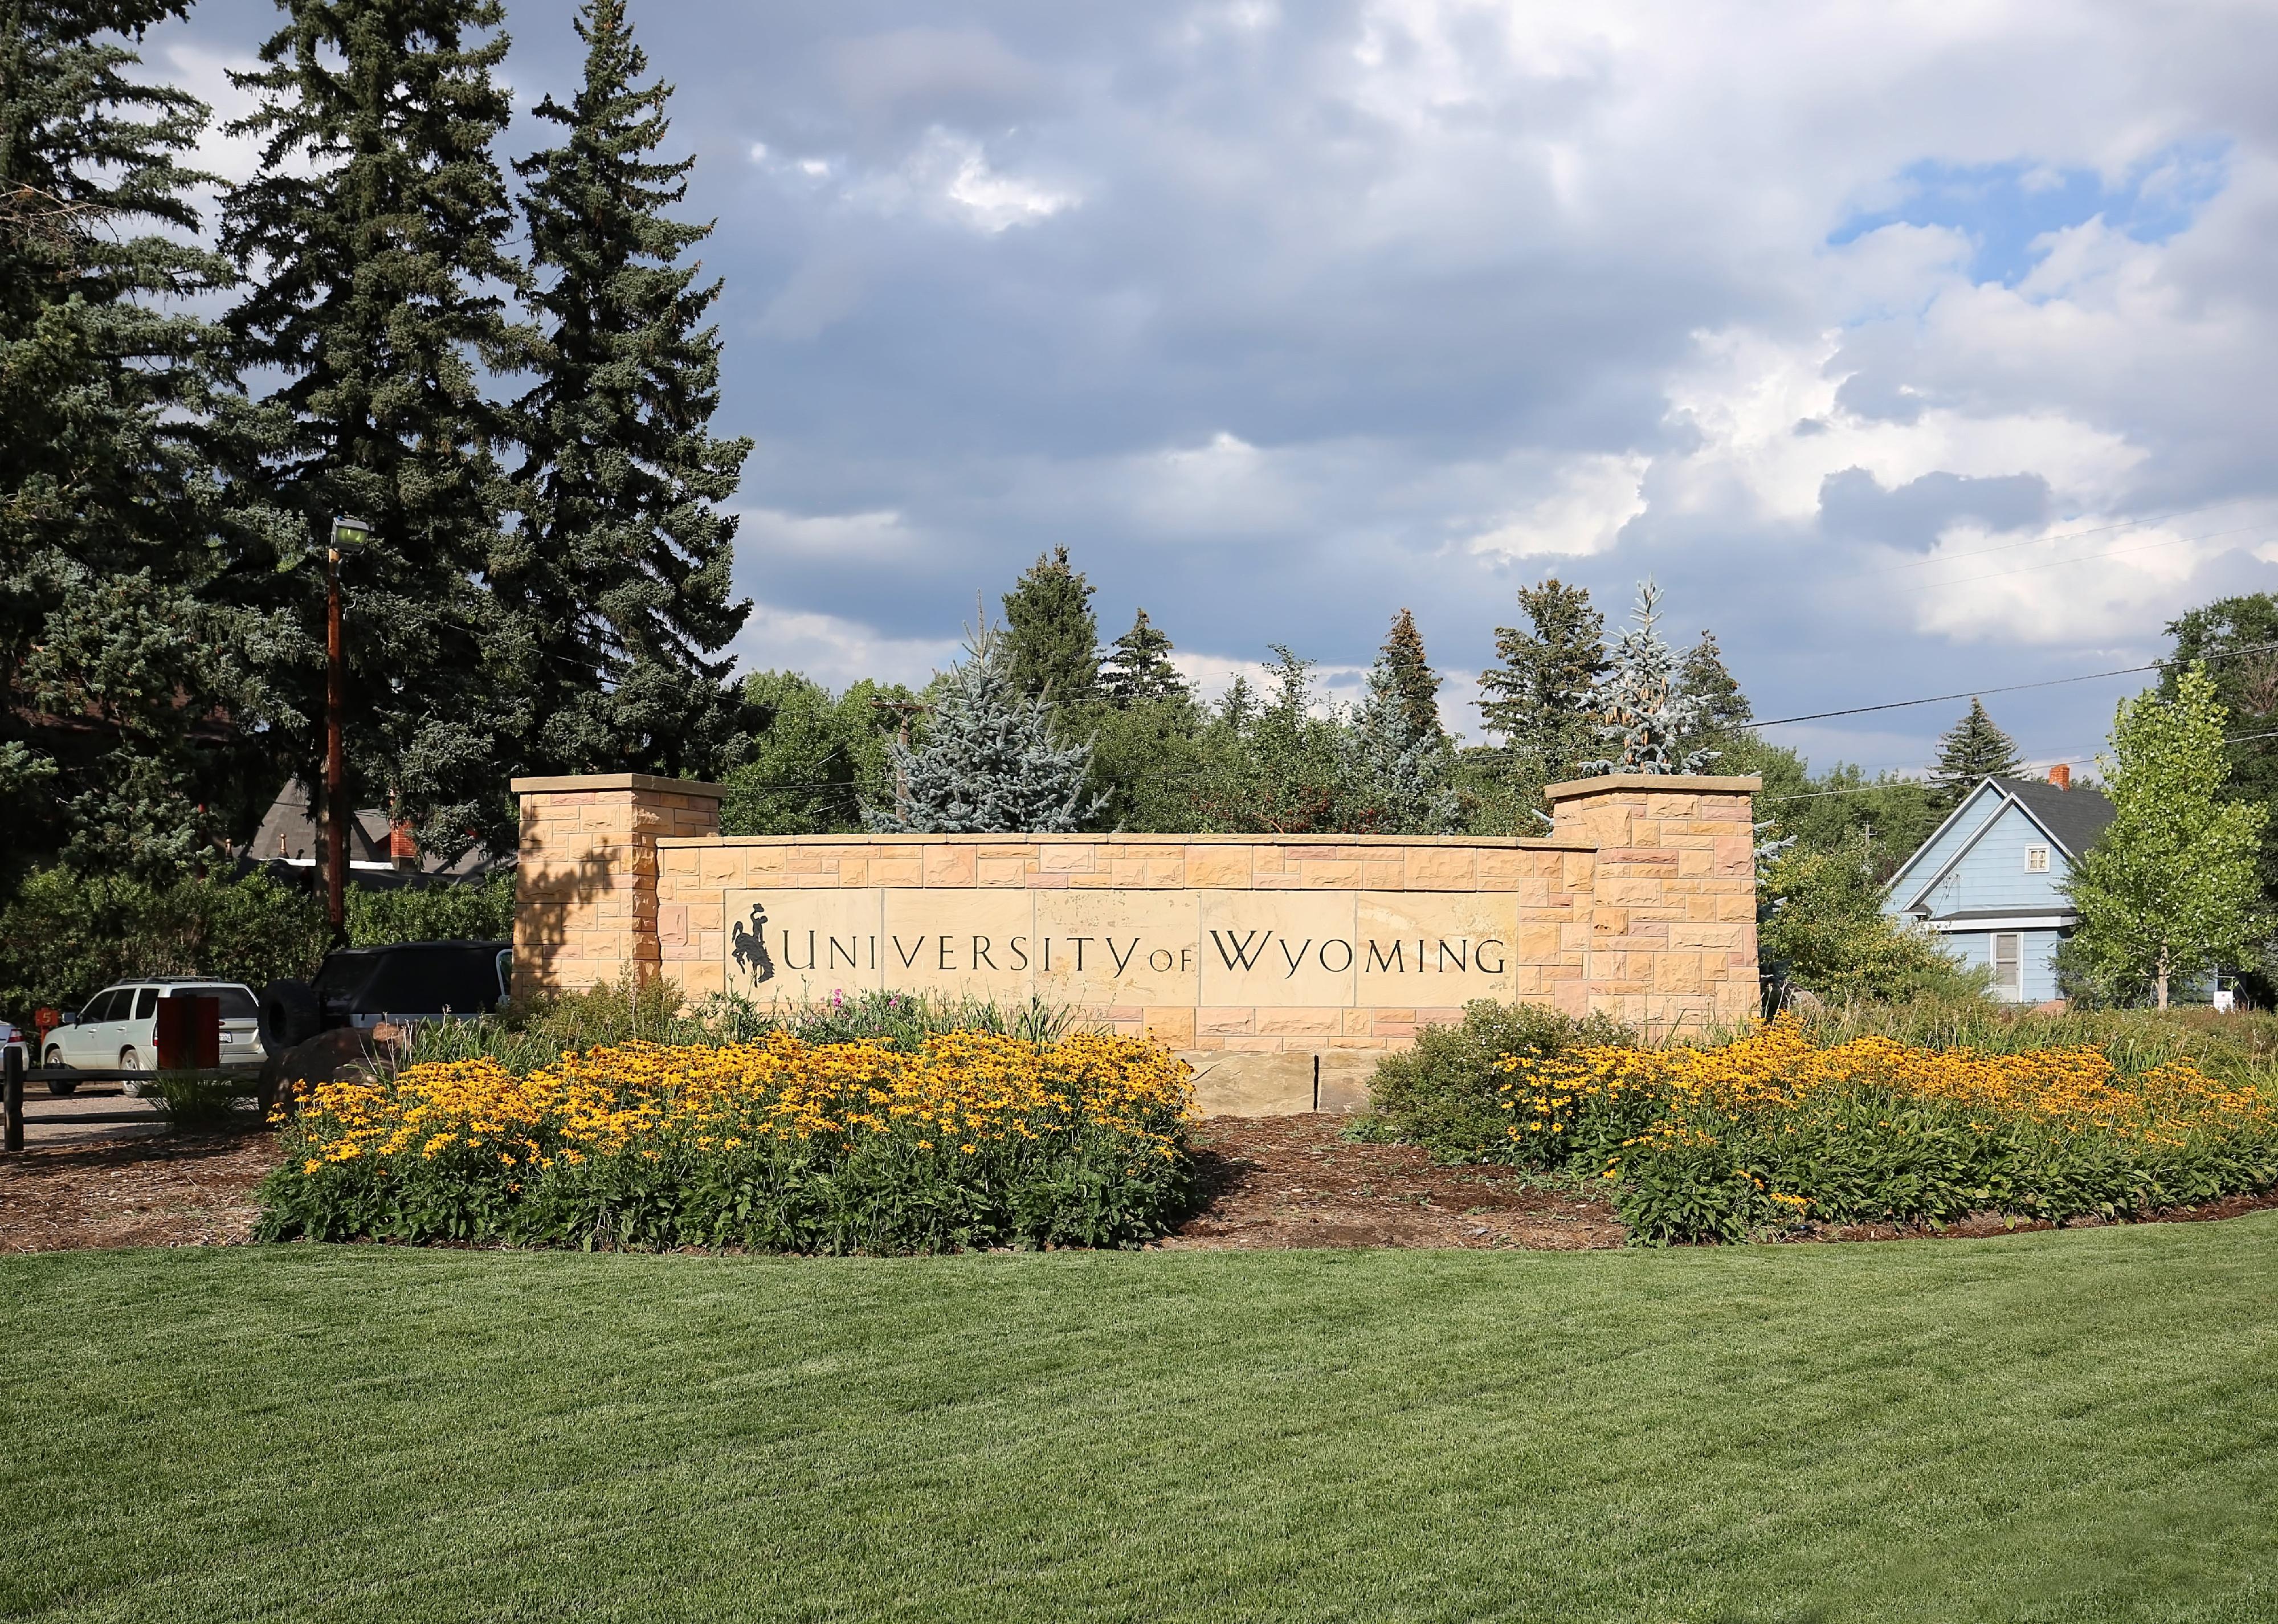 University of Wyoming campus entrance sign.